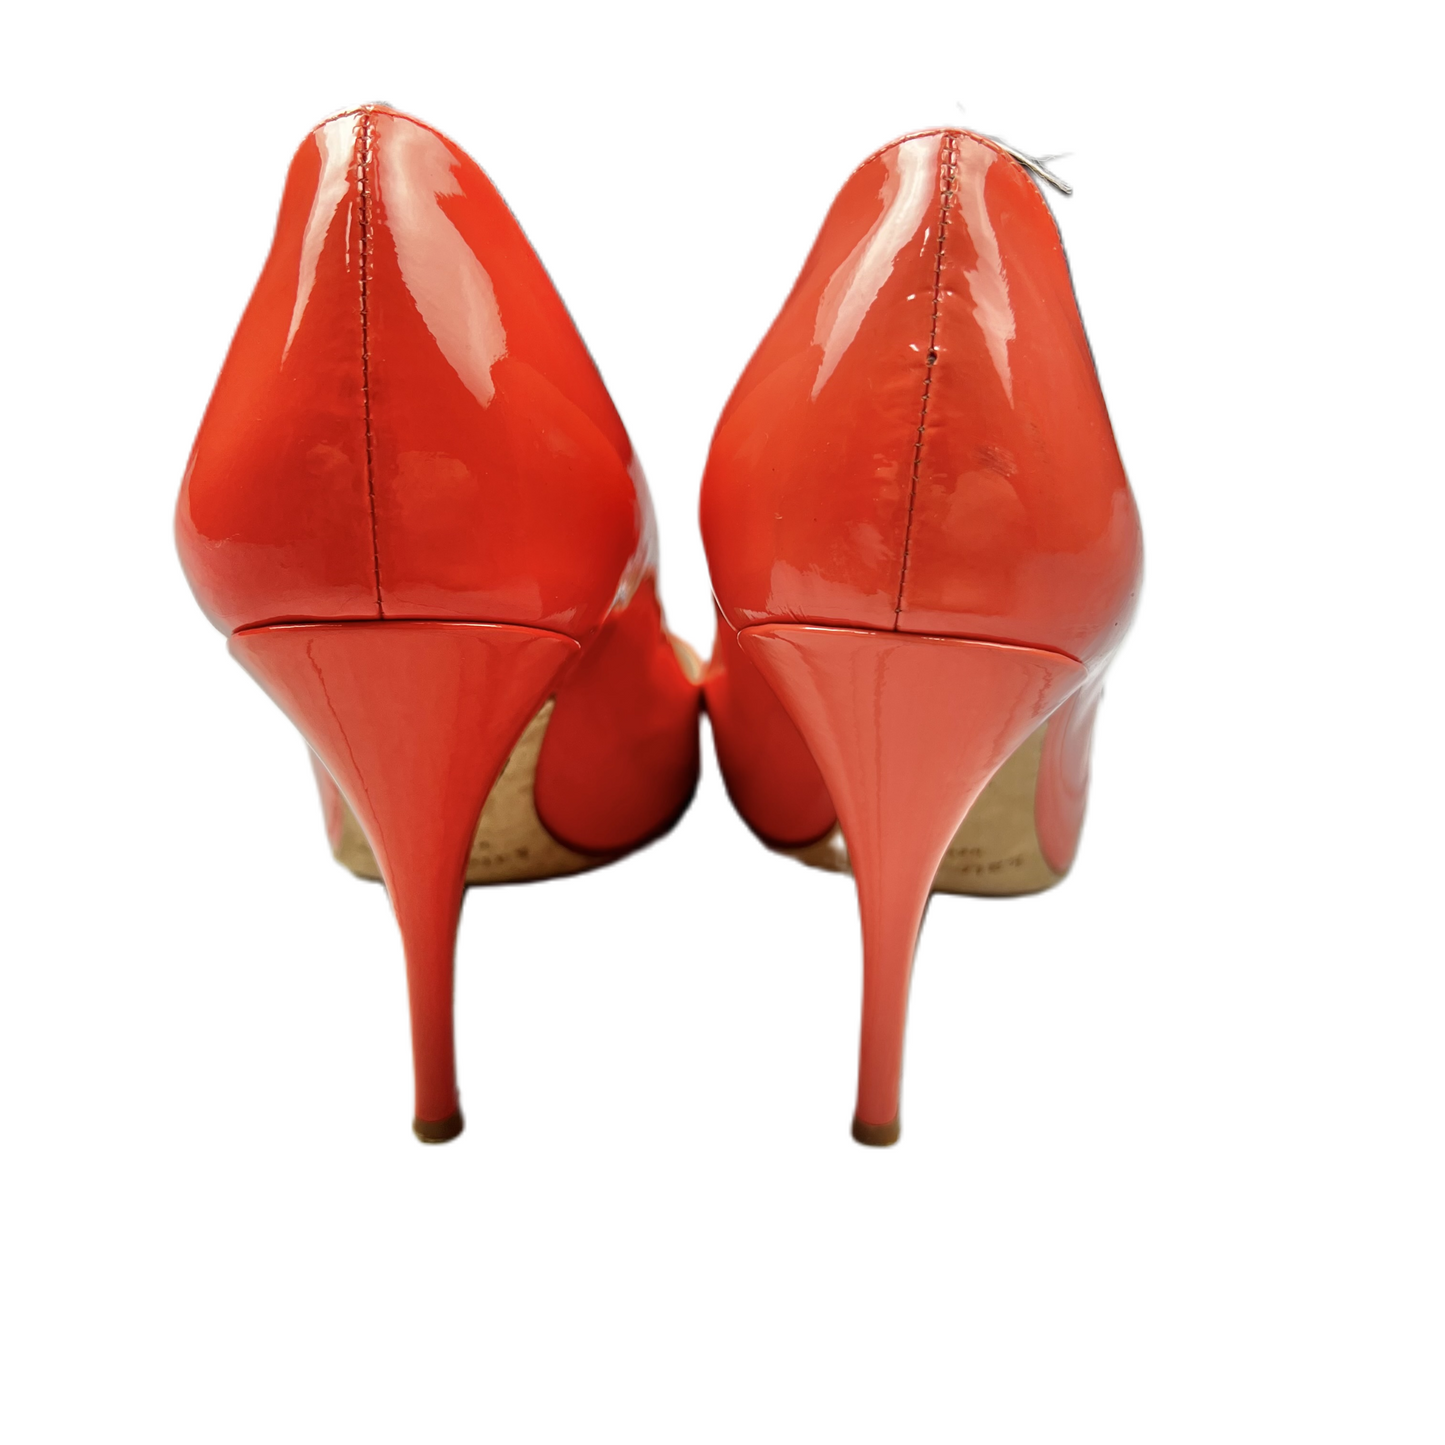 Coral Shoes Heels Stiletto By Kate Spade, Size: 7